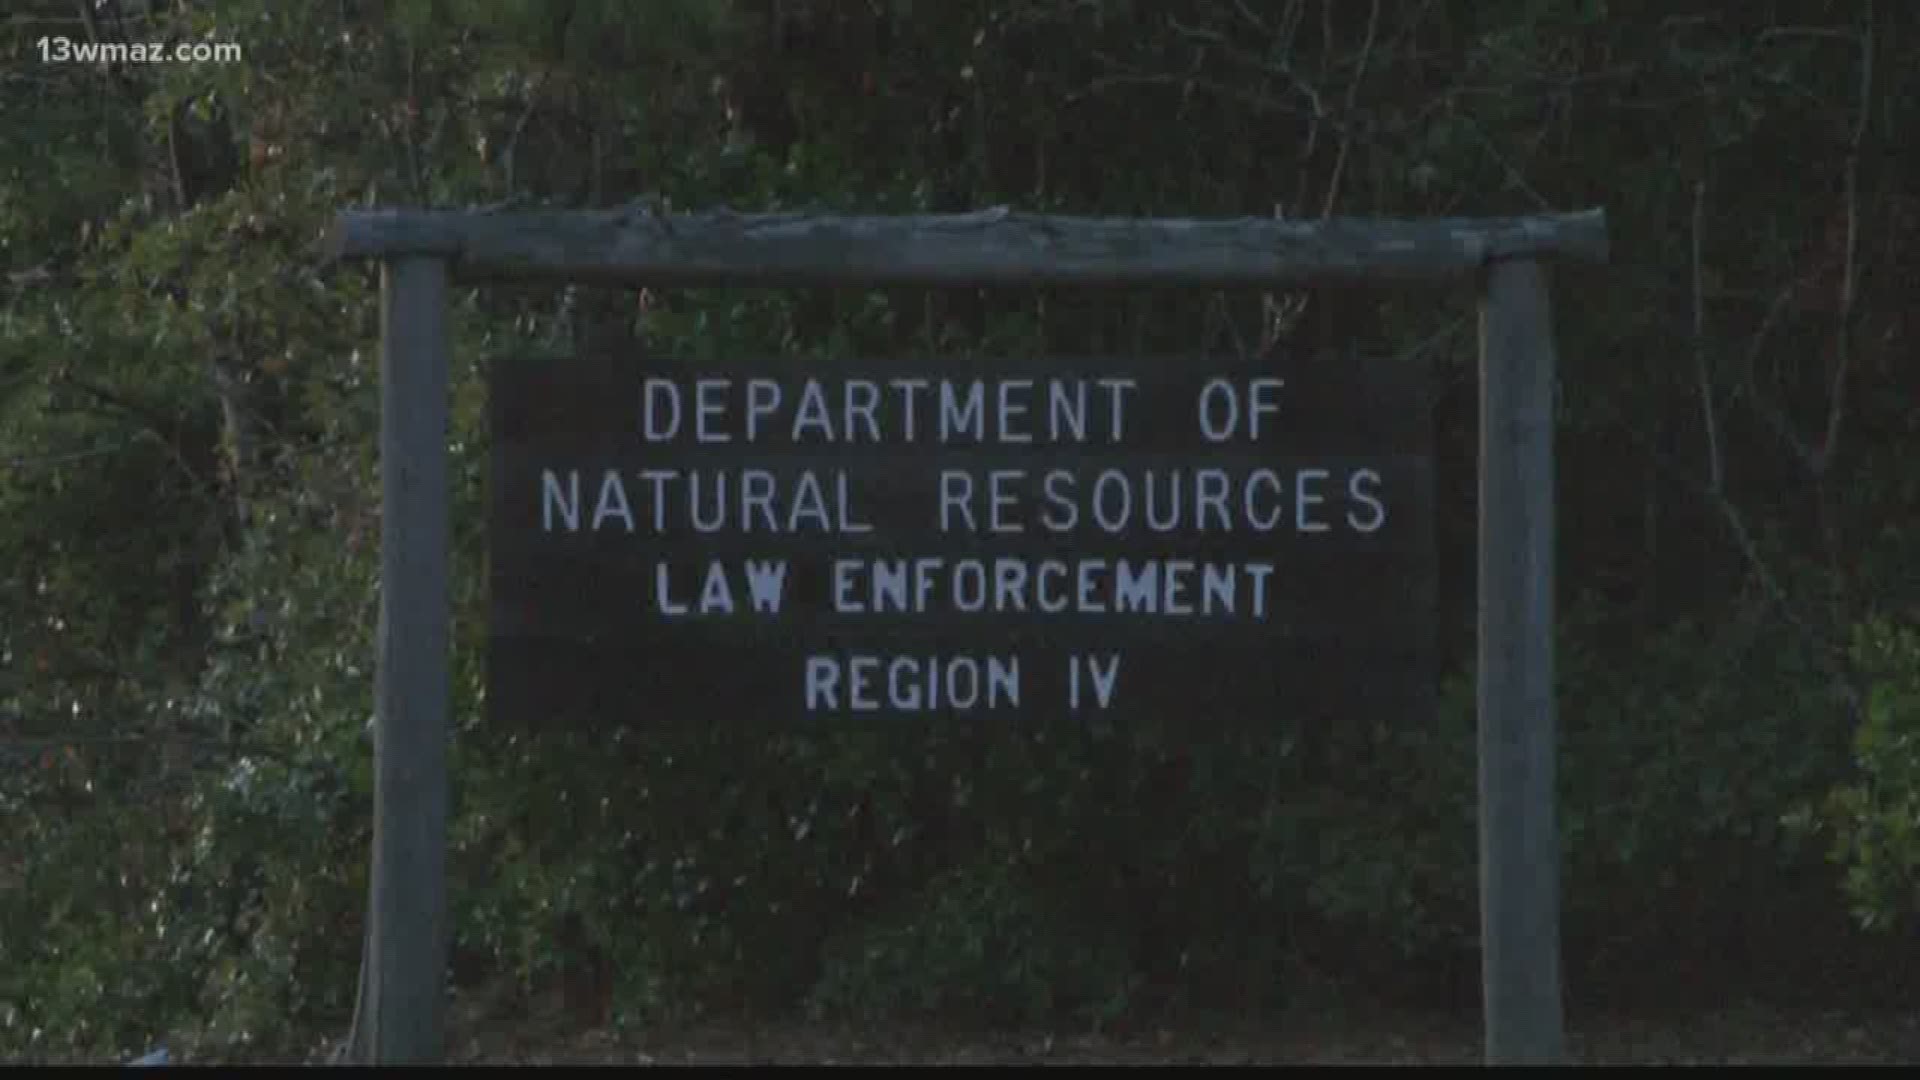 Department leaders say employees will relocate to other offices in the region.